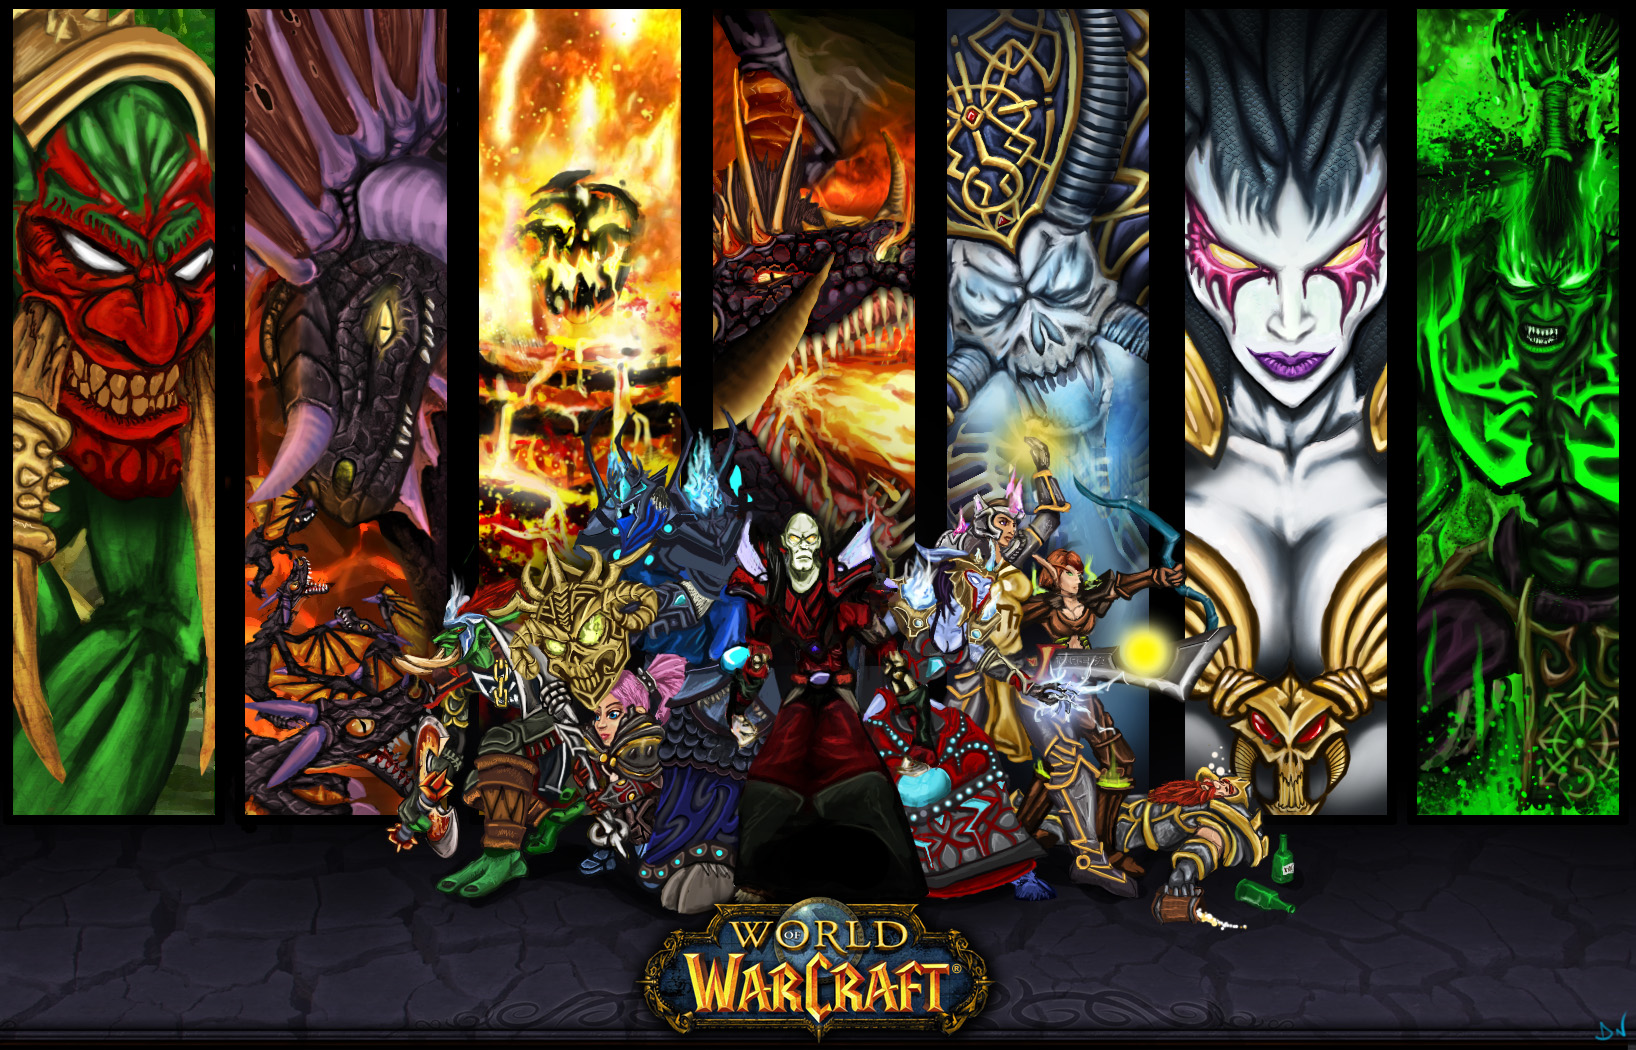 World of Warcraft Exclusive HD Wallpapers 2150